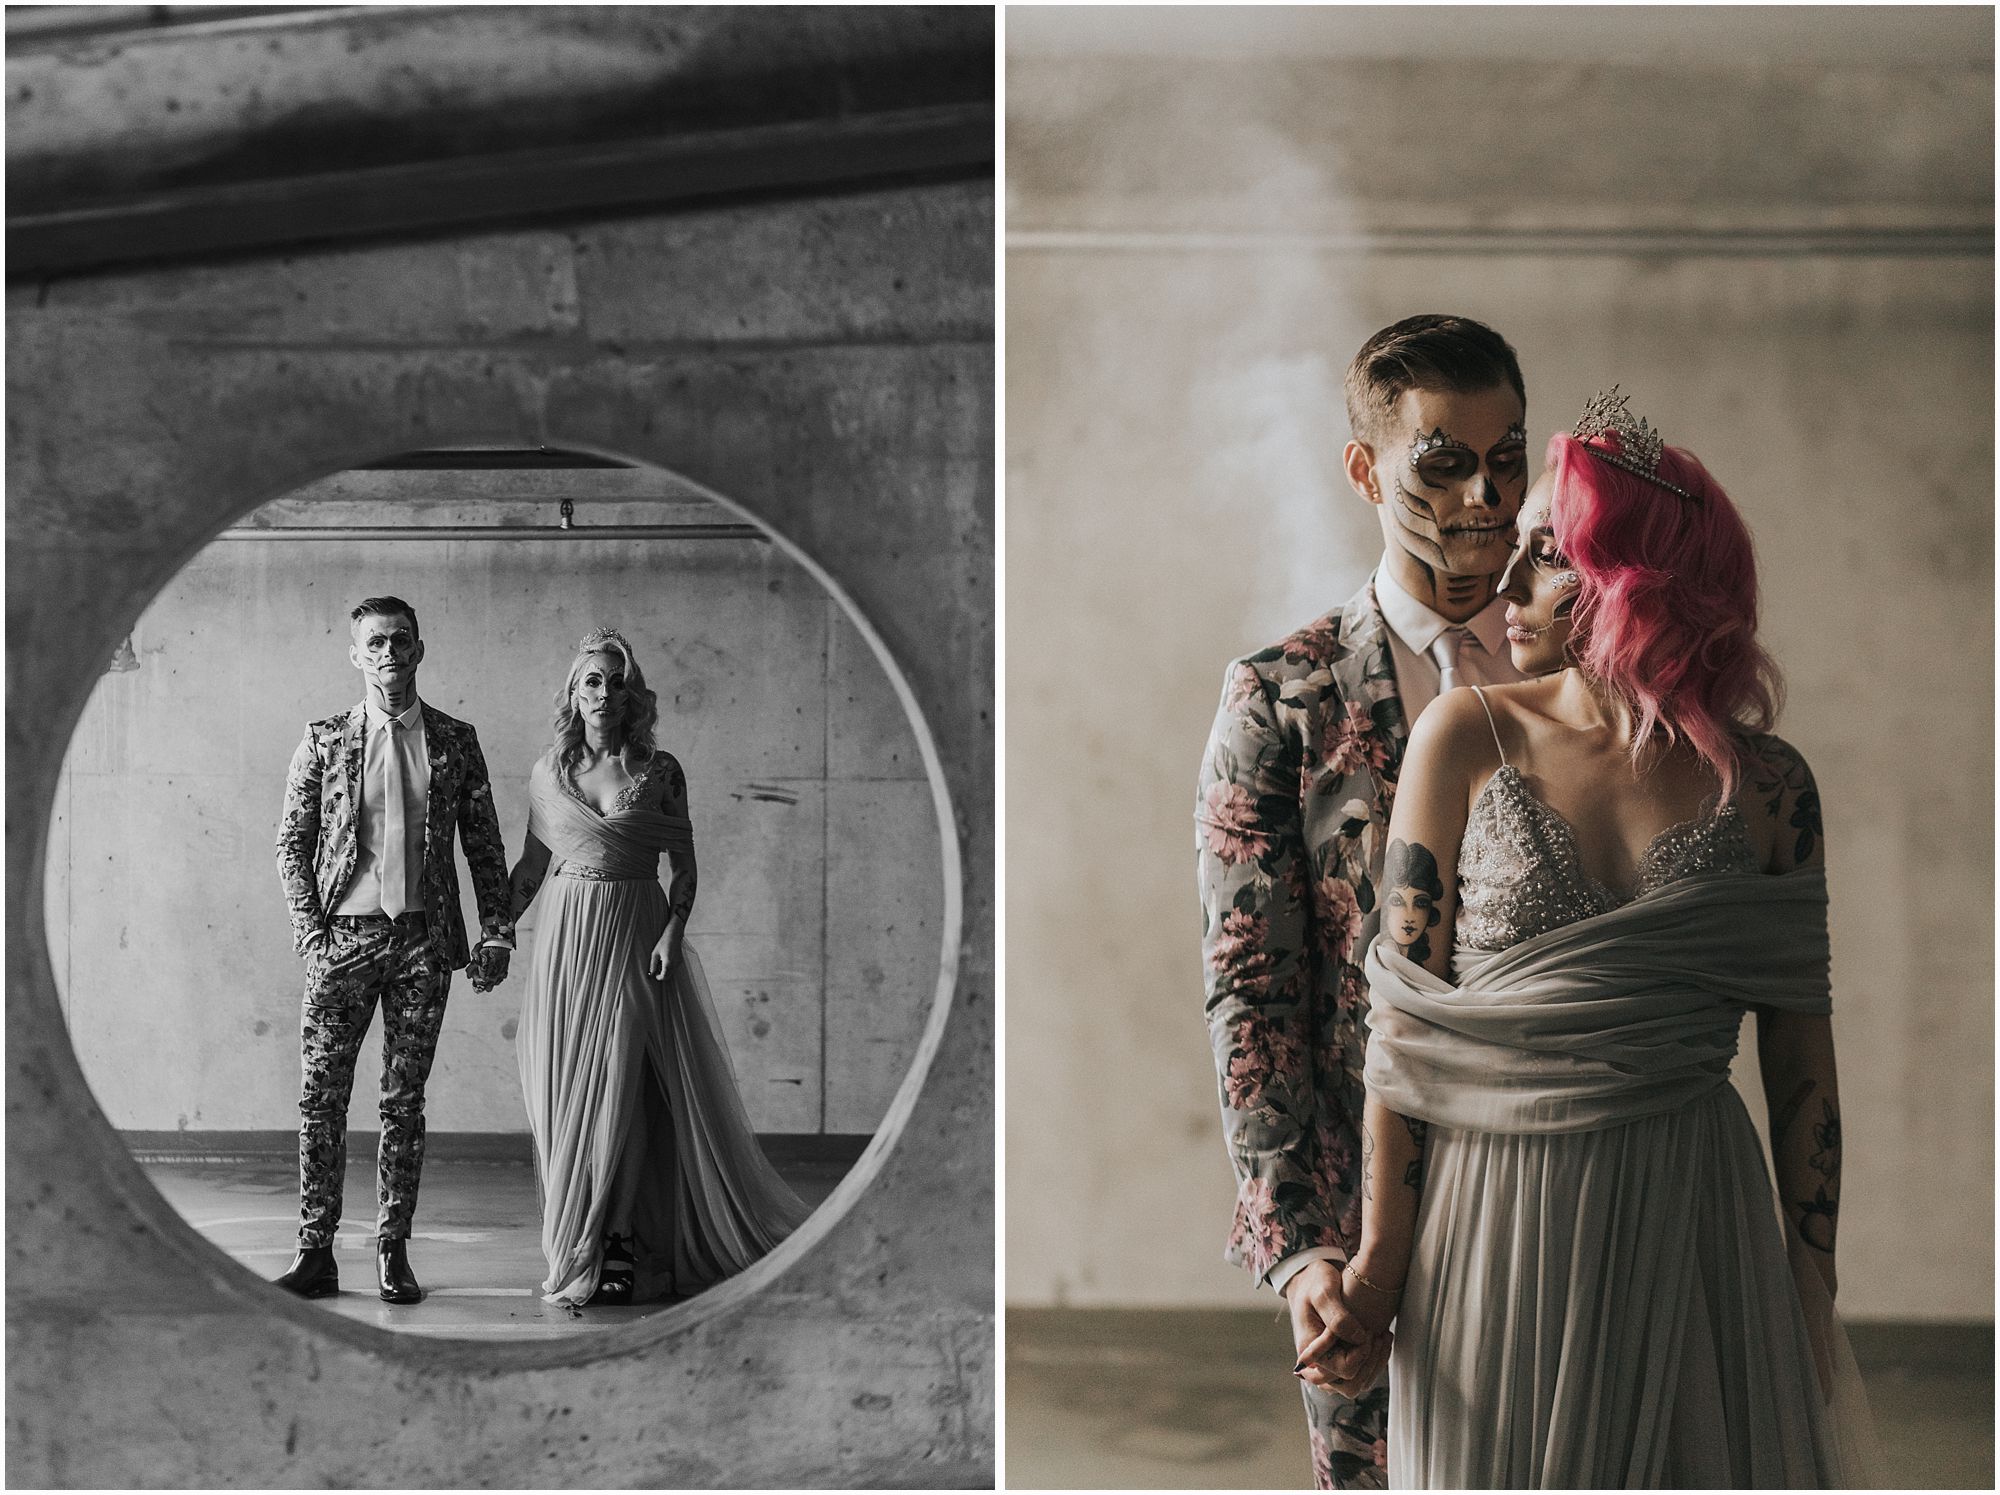 Using a parkade for edgy wedding portraits